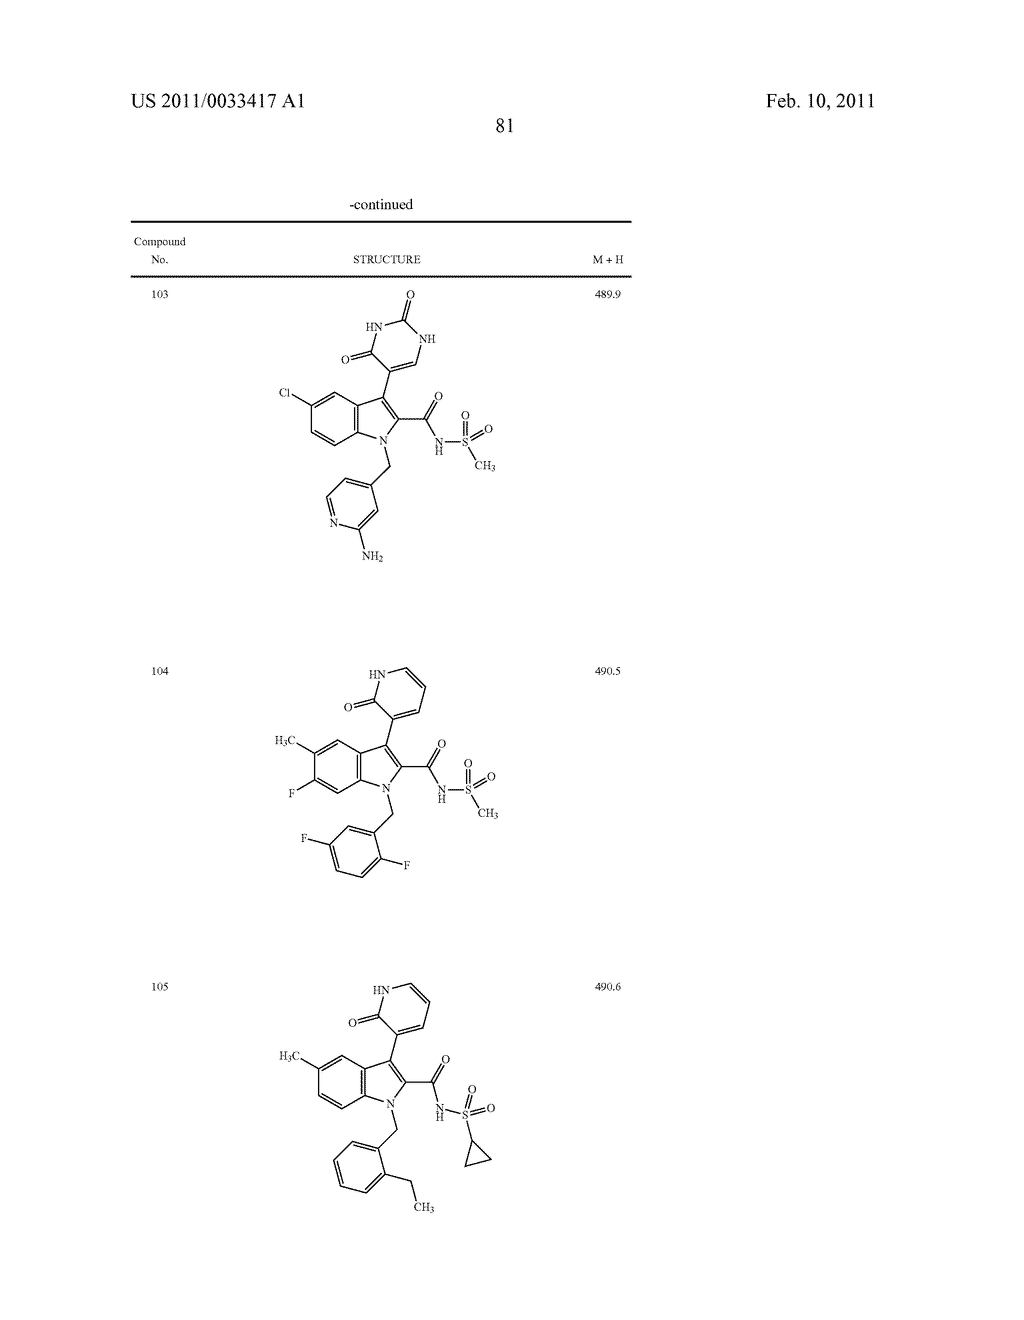 2,3-SUBSTITUTED INDOLE DERIVATIVES FOR TREATING VIRAL INFECTIONS - diagram, schematic, and image 82